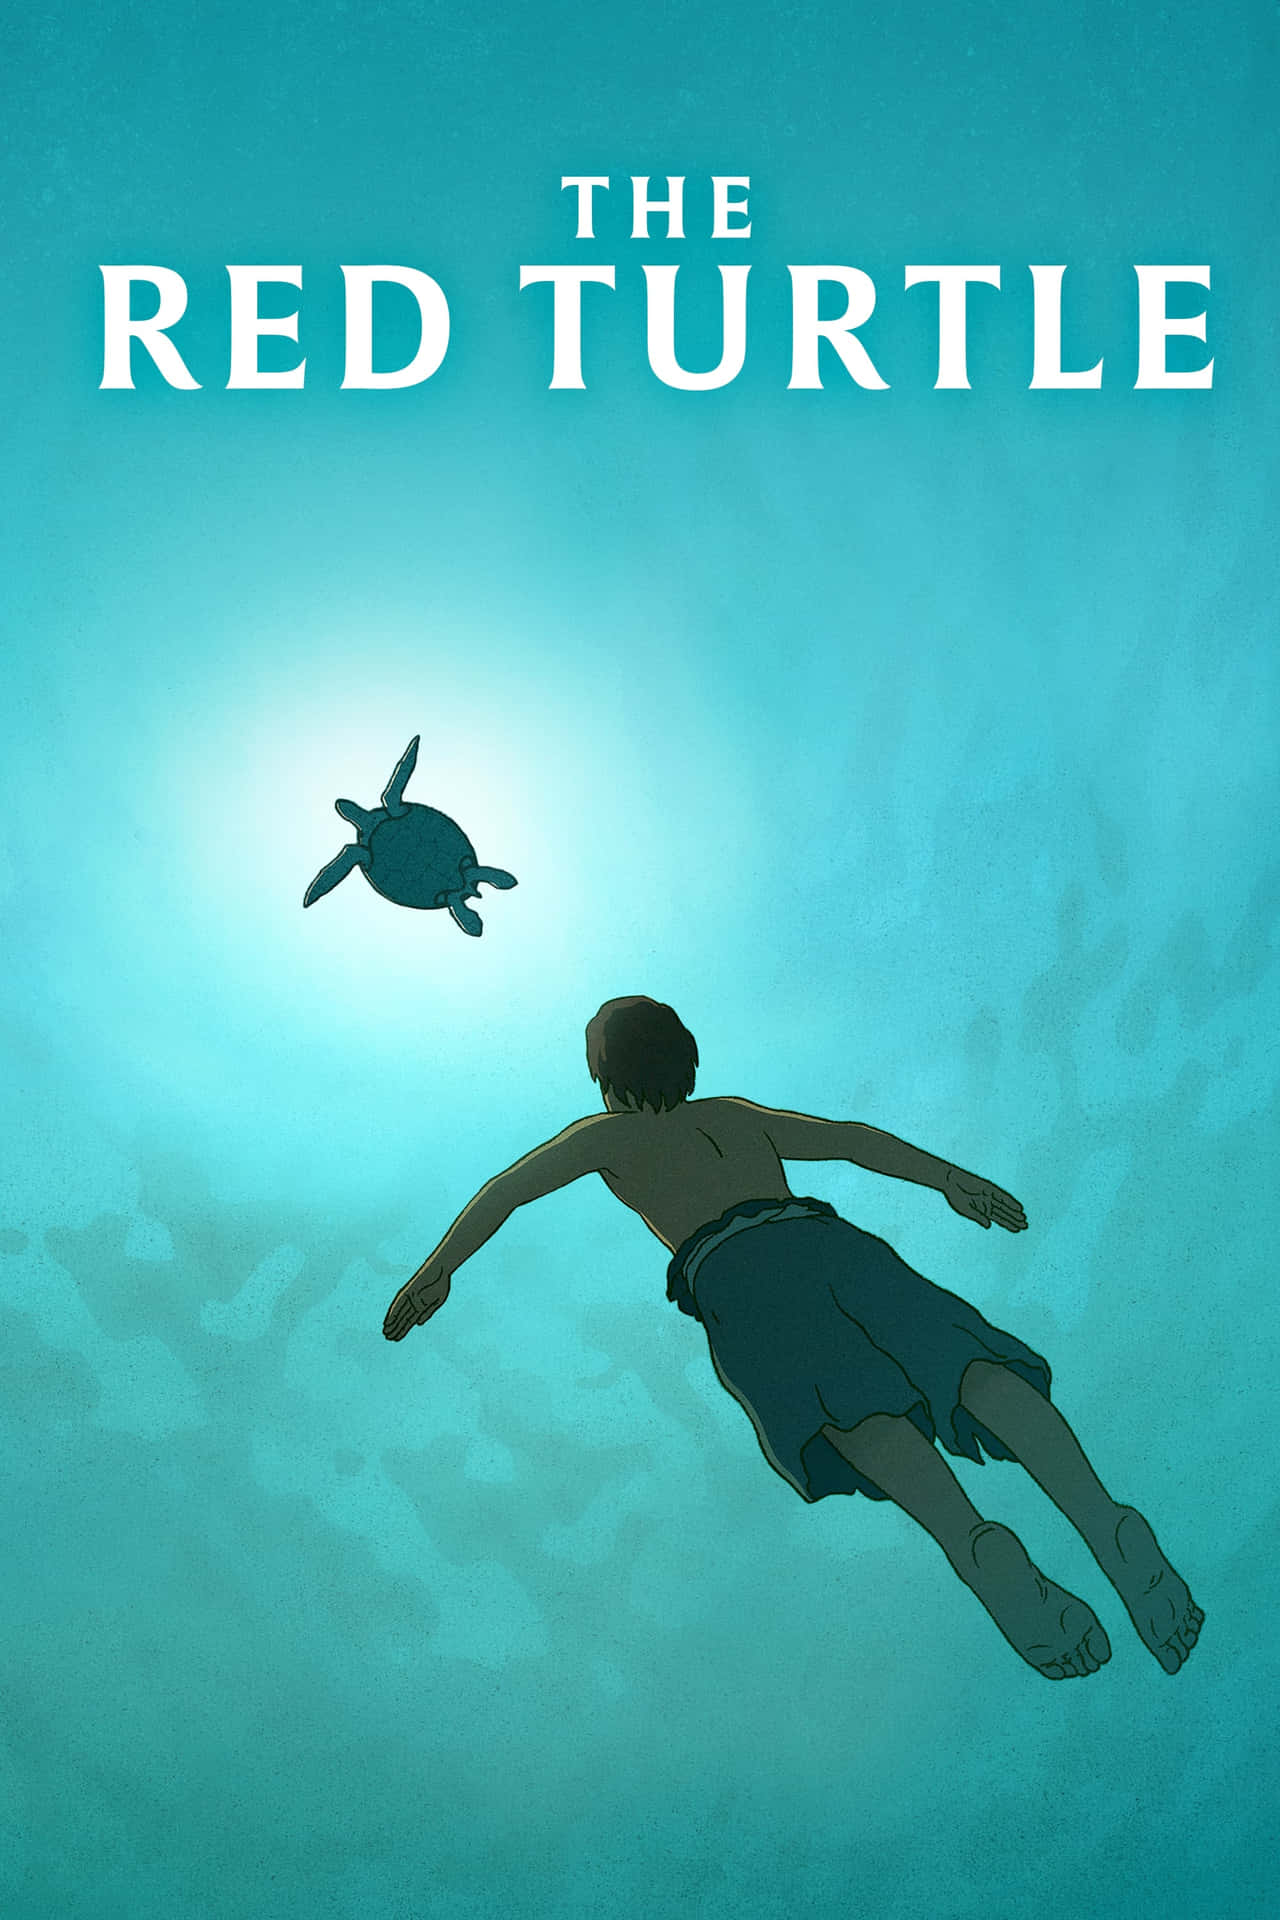 Peaceful Moment with the Red Turtle Wallpaper